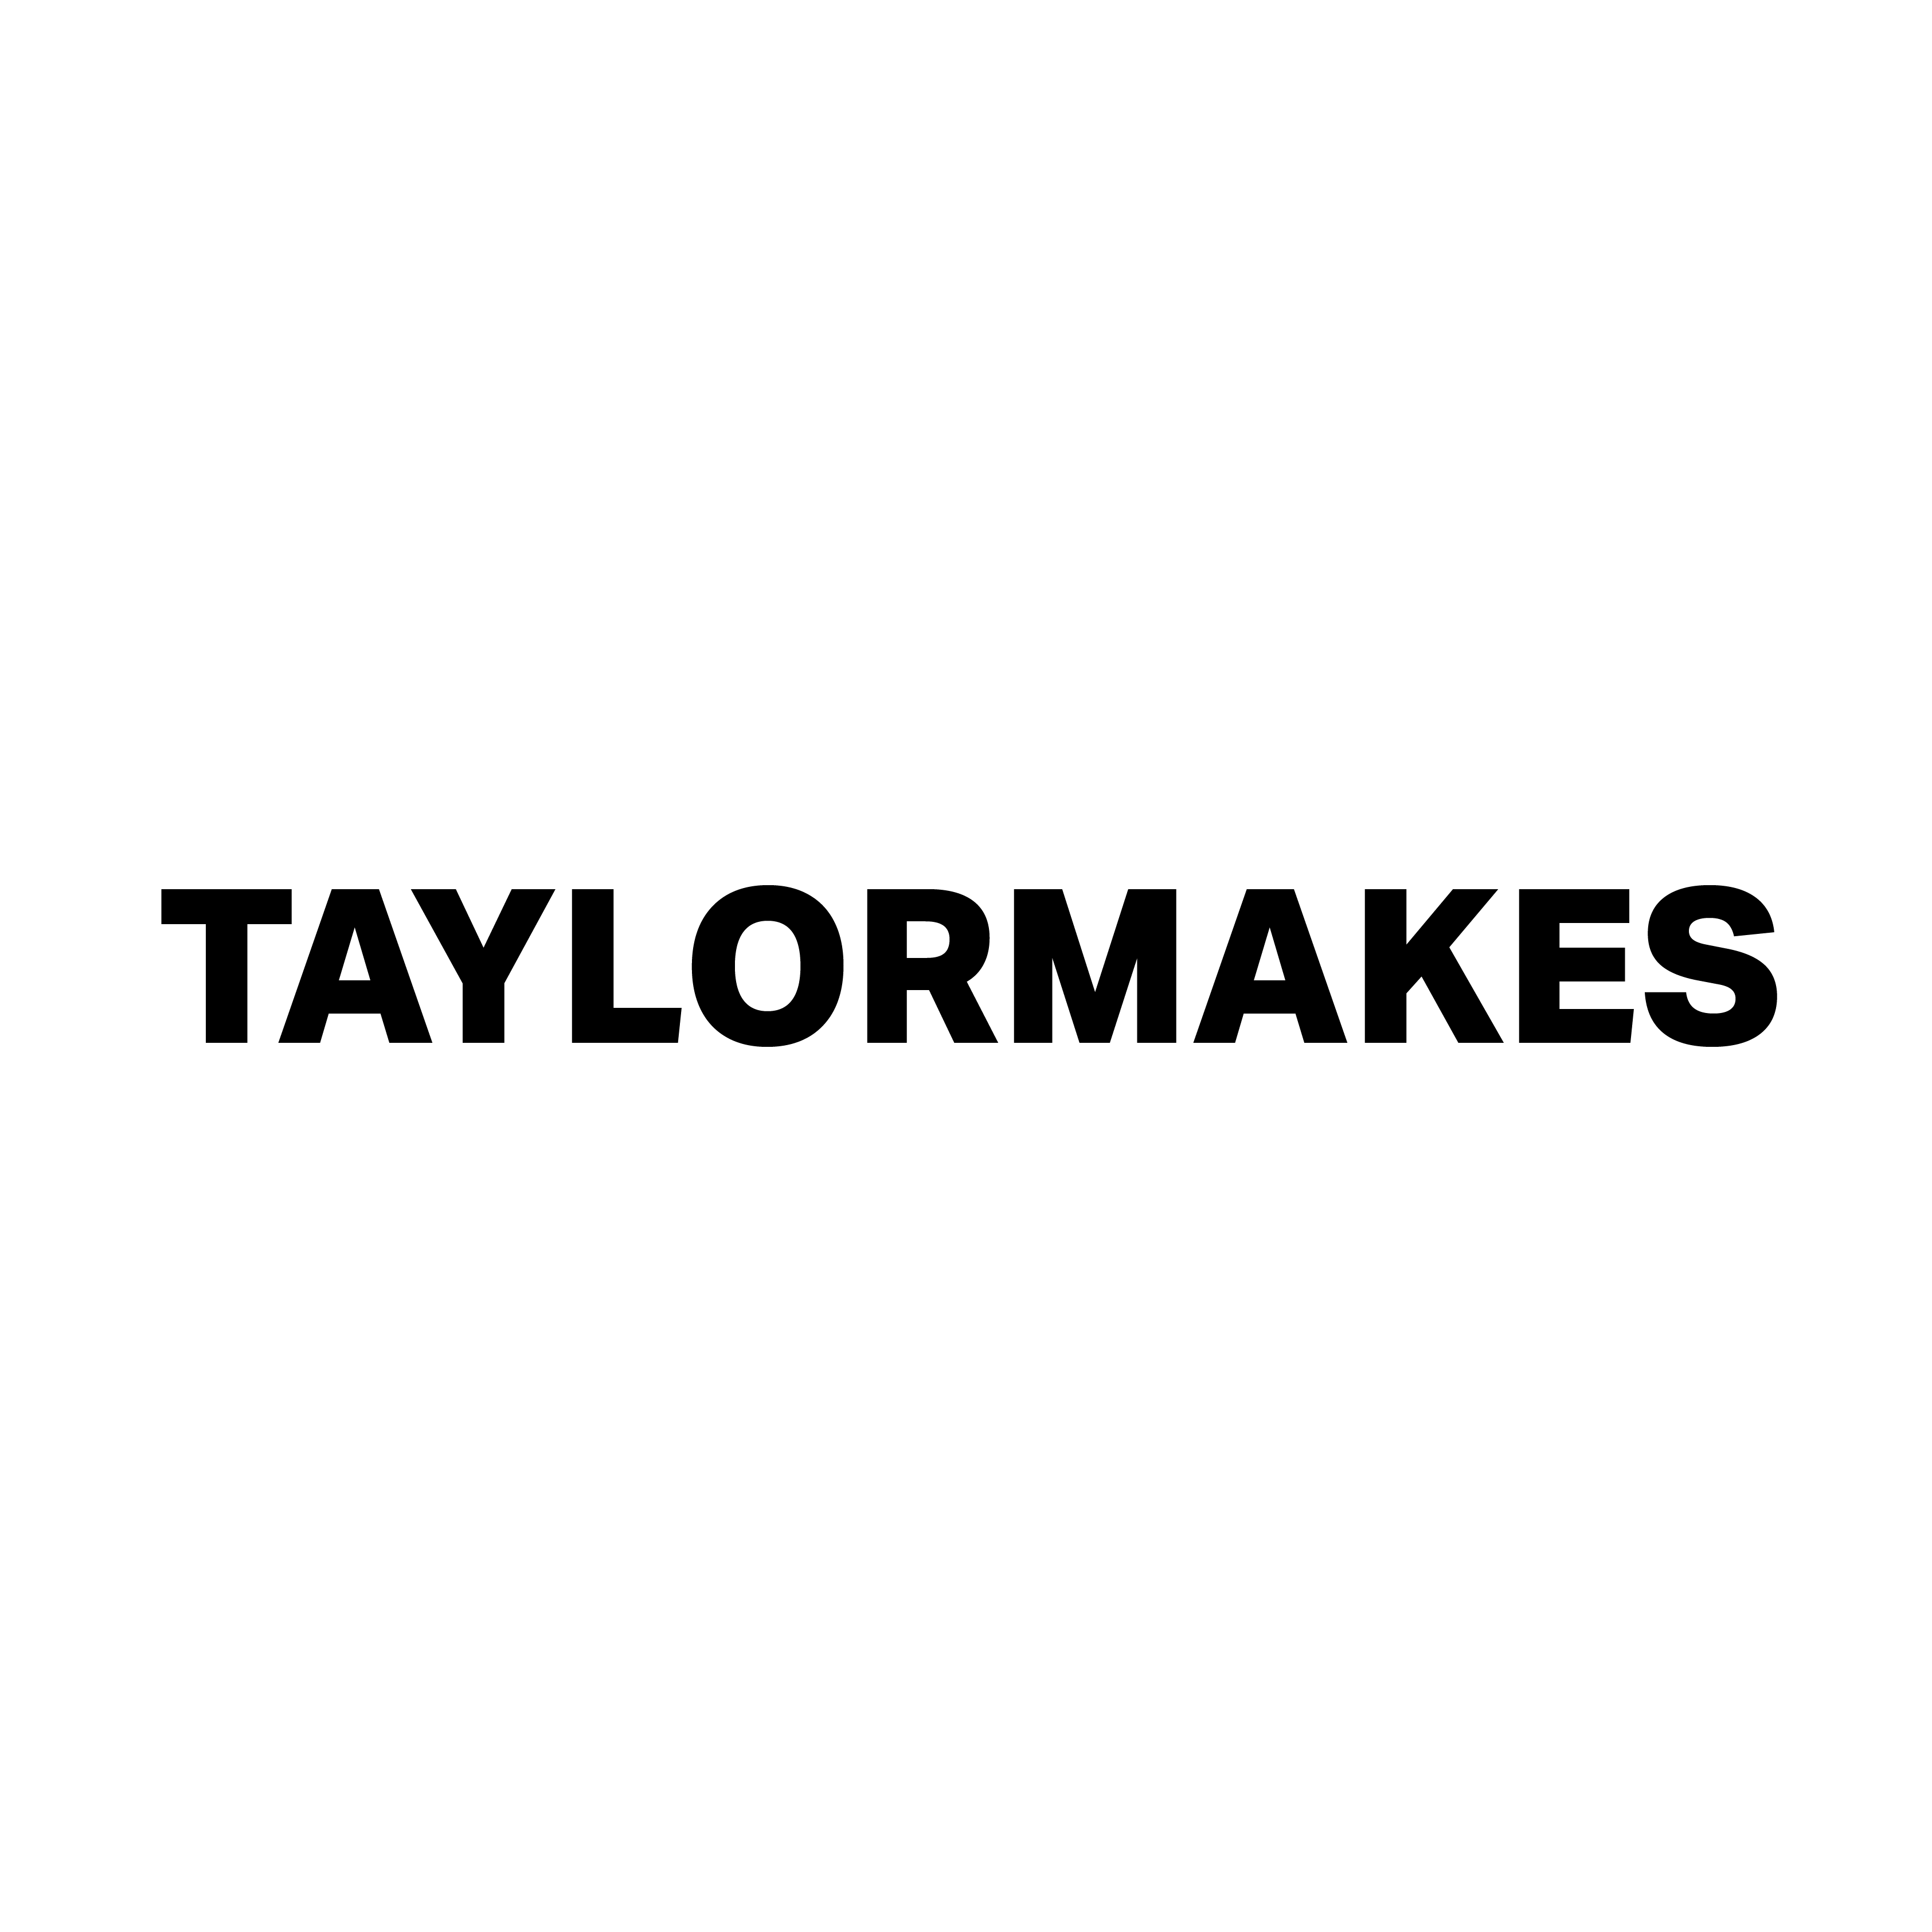 TAYLORMAKES.DESIGN